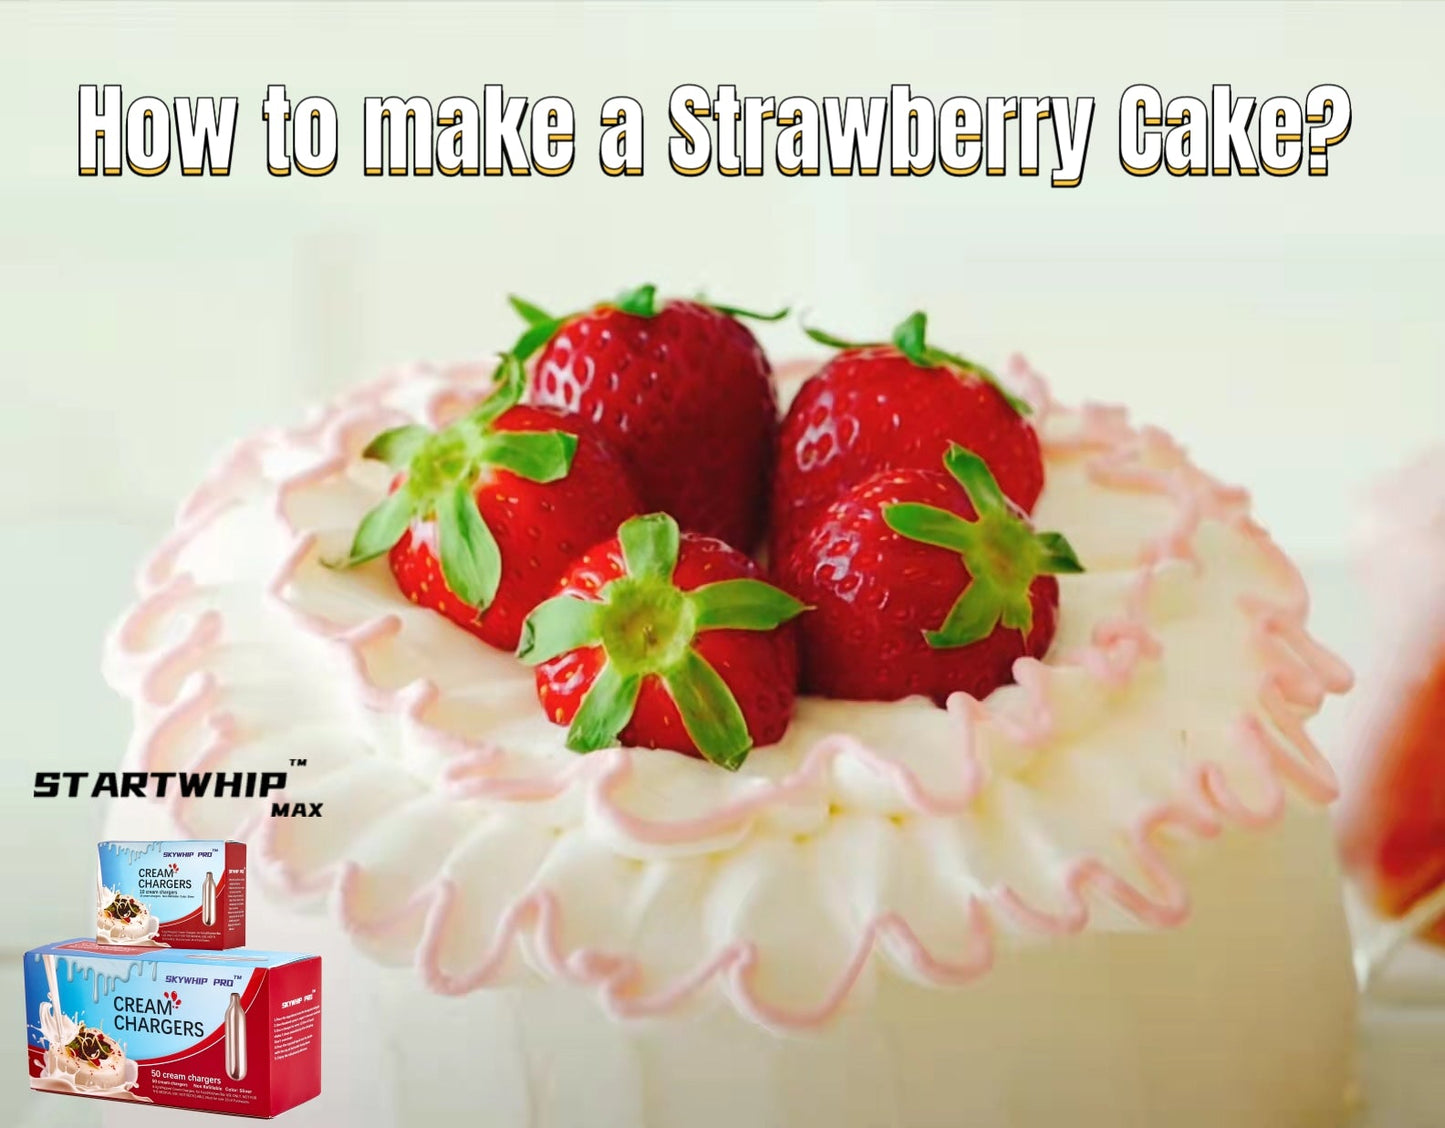 whipper cream chargers - How to make a strawberry cake - Startwhip Max AU